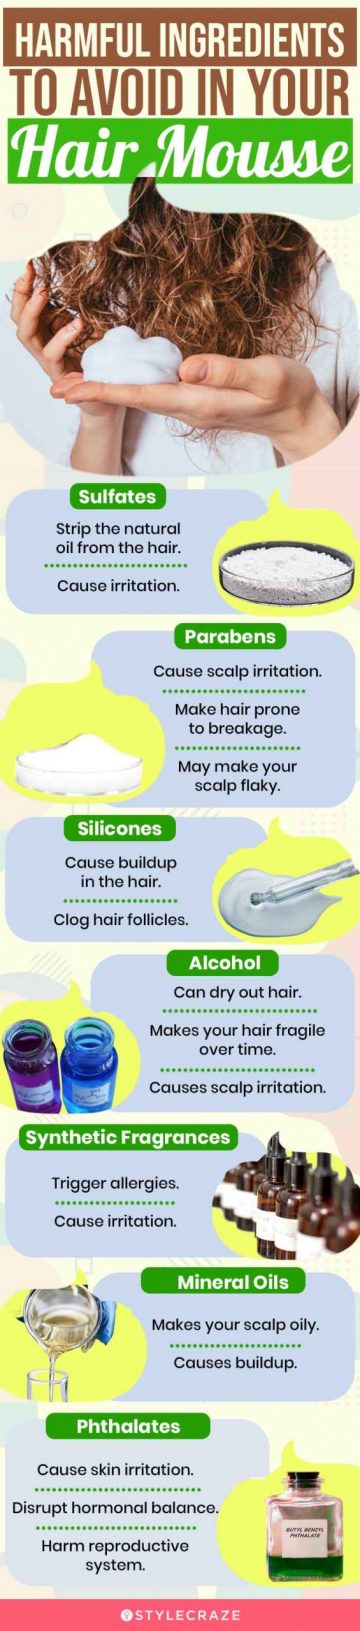 Harmful Ingredients To Avoid In Your Hair Mousse (infographic)